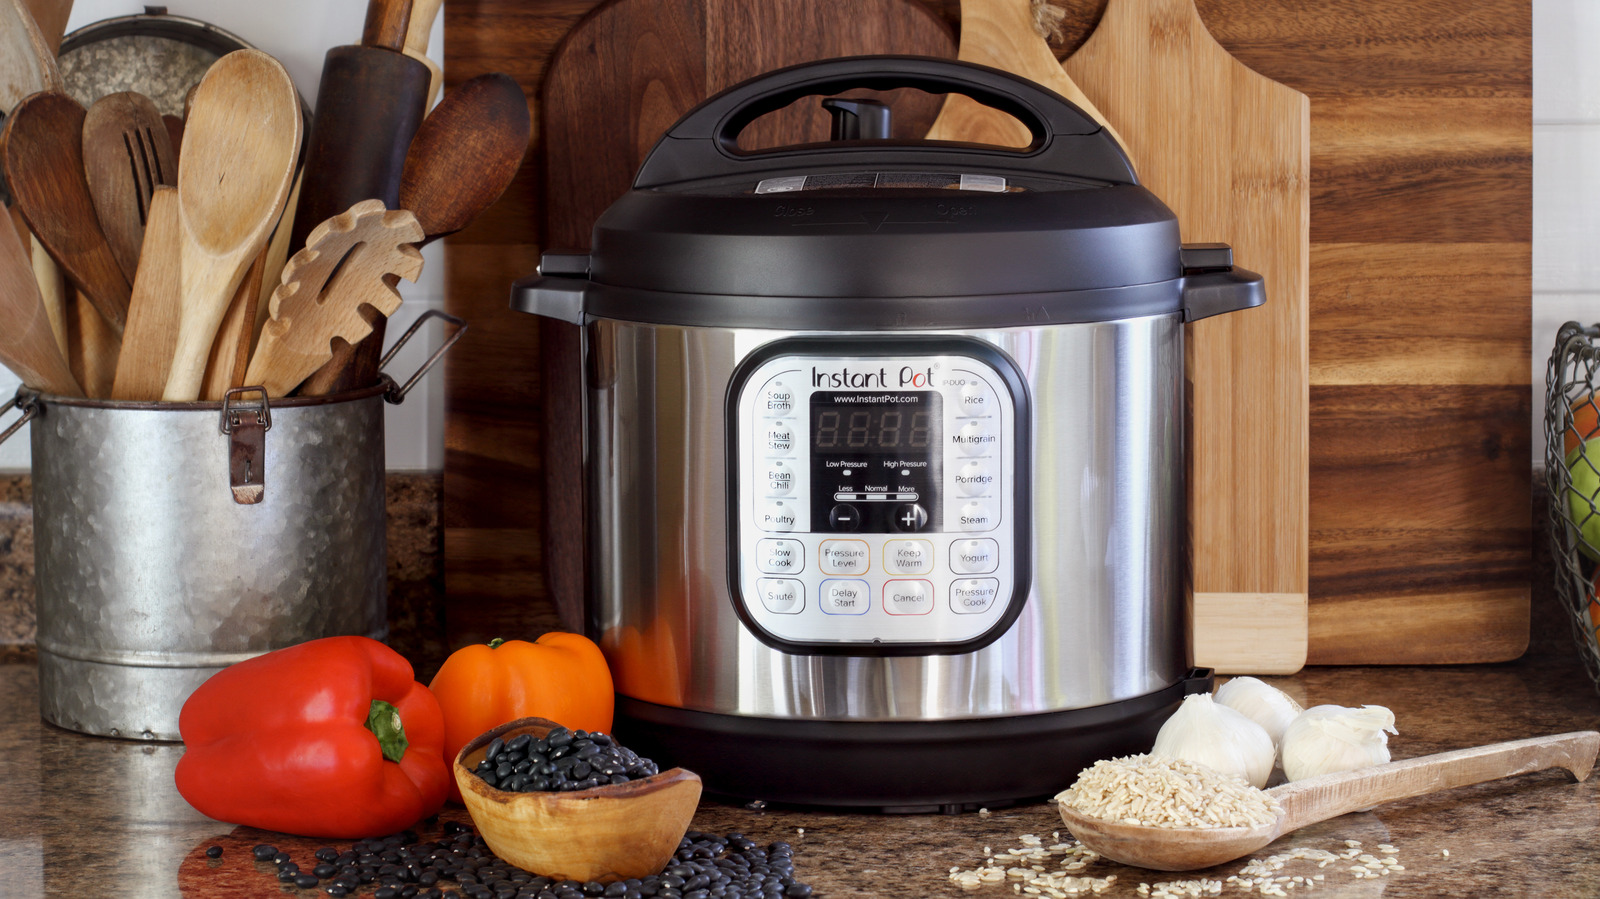 https://www.tastingtable.com/img/gallery/why-instant-pots-cook-food-more-slowly-at-higher-altitudes/l-intro-1652210262.jpg